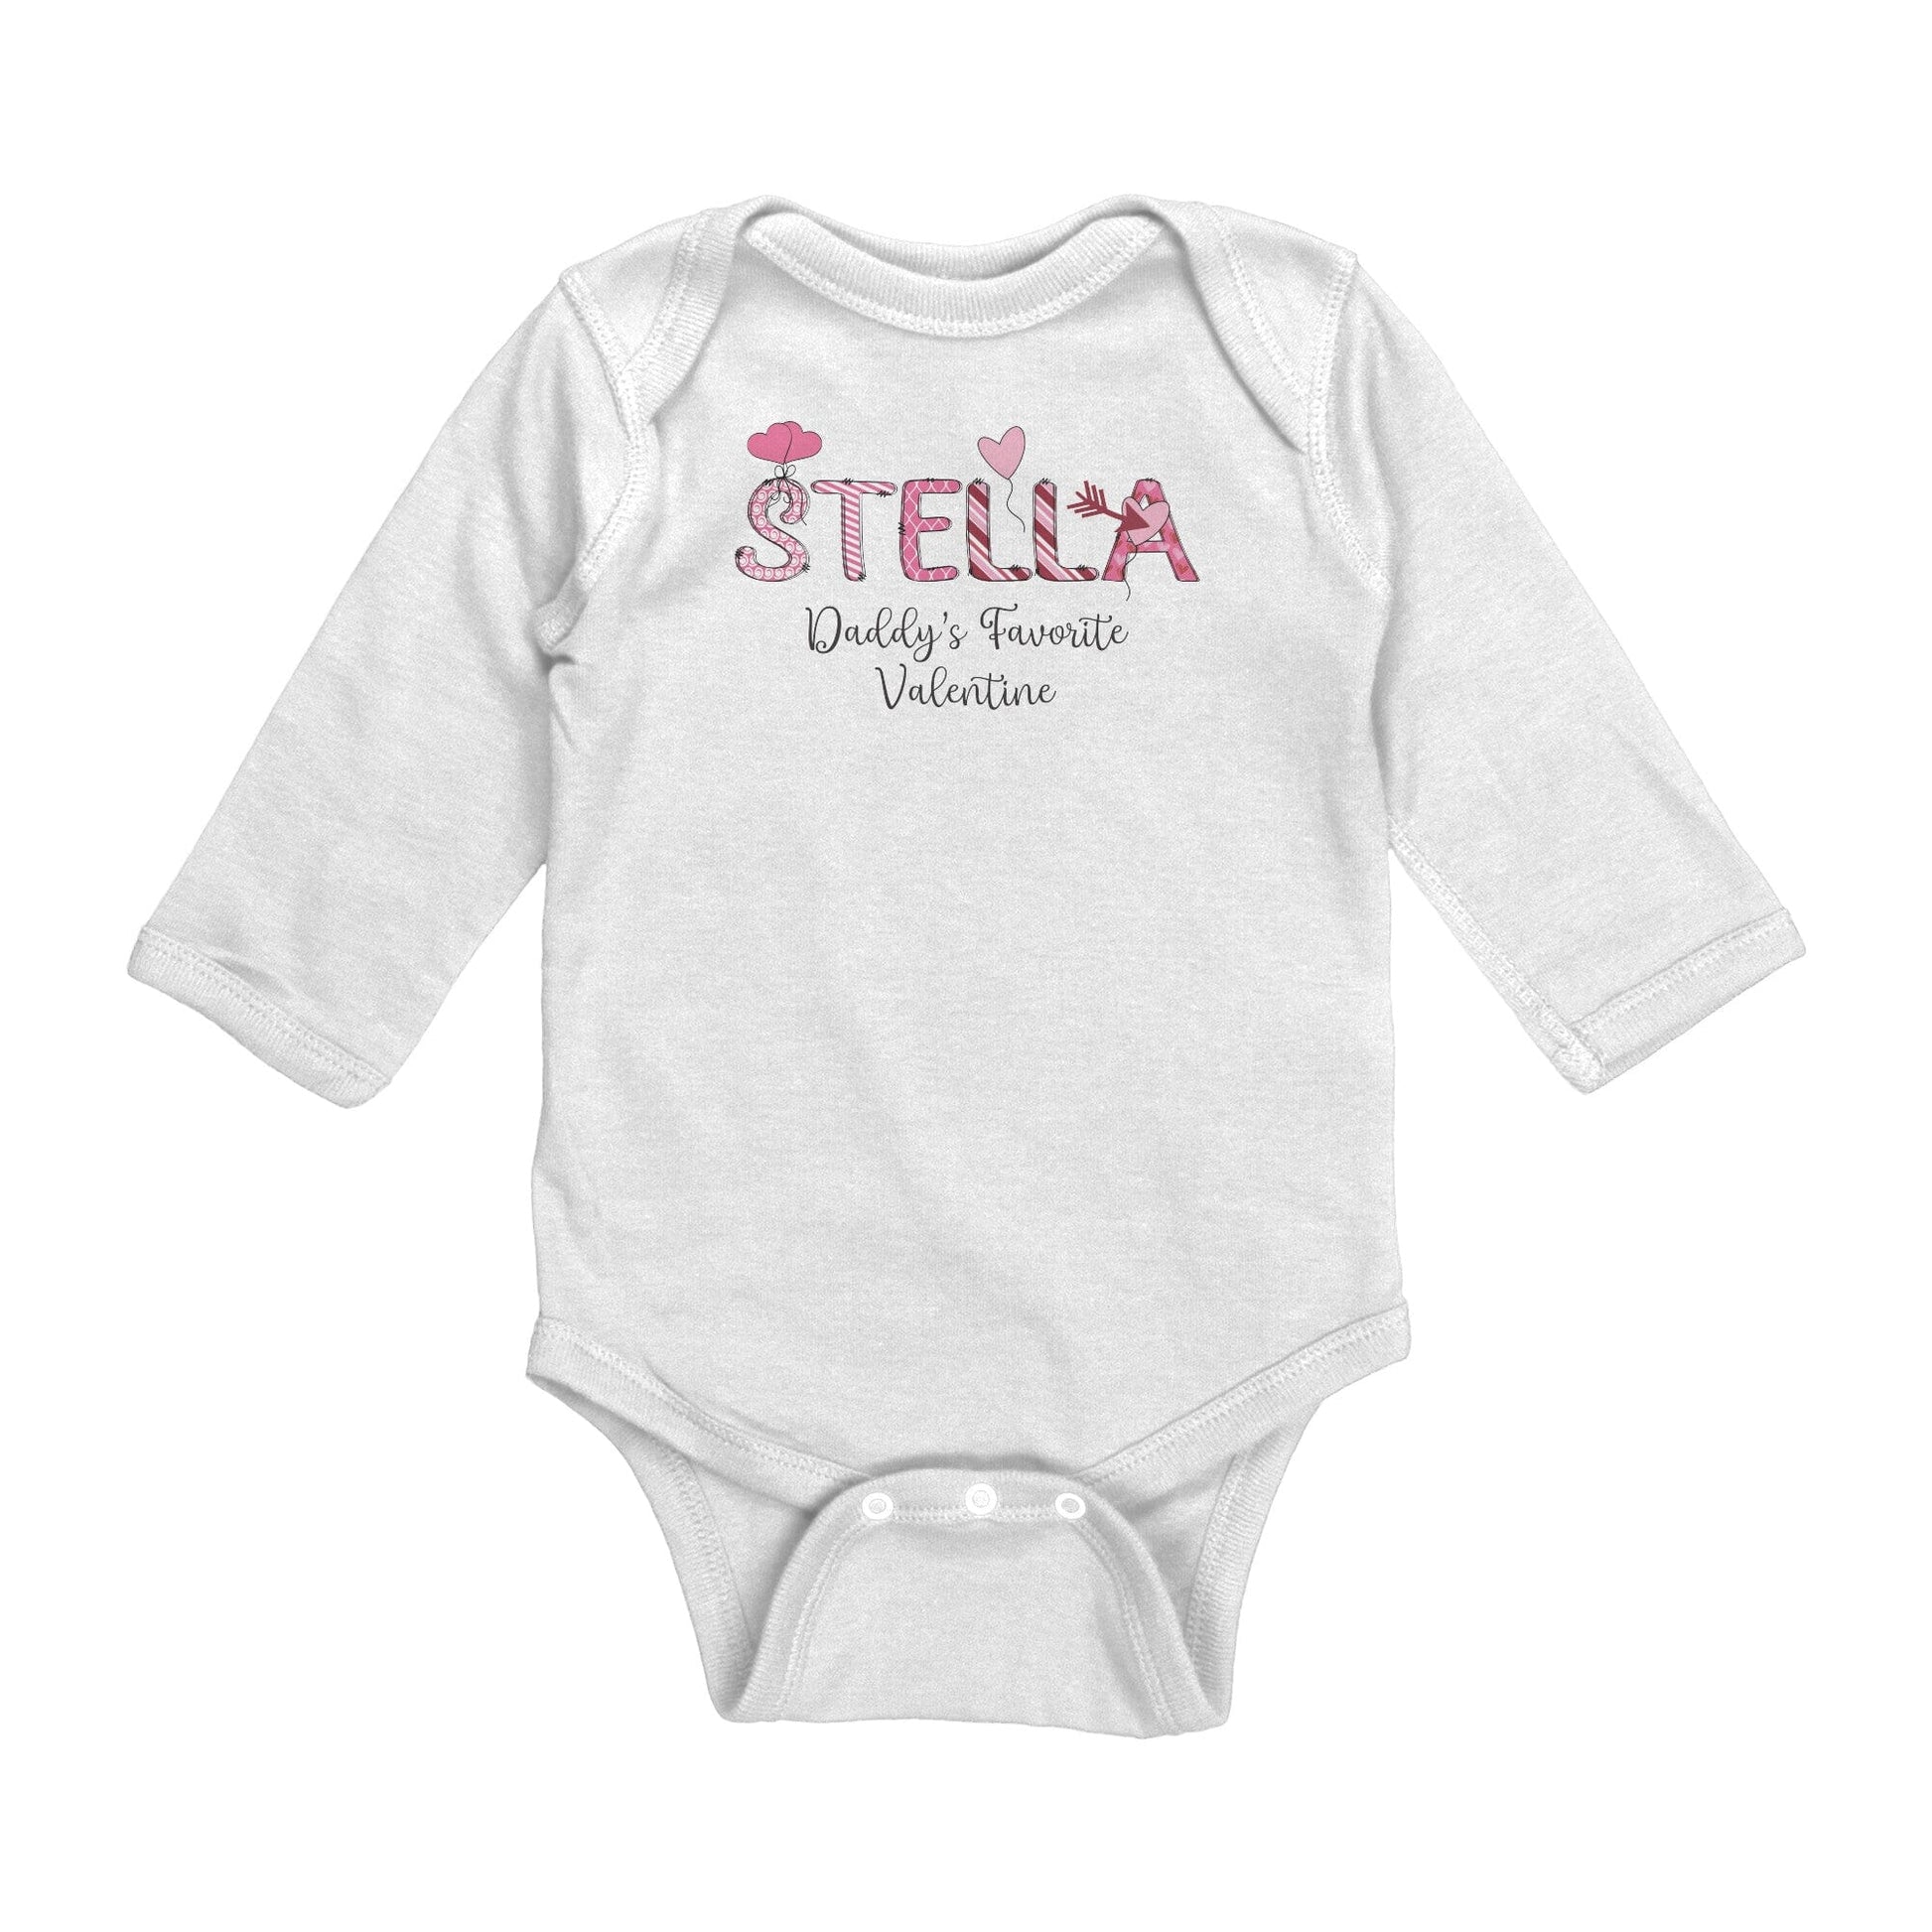 Baby's First Valentine's Day Outfit | Newborn Monogrammed Romper | Baby Girl Onesie | Personalized Daddy's Favorite 1st Valentine Day Outfit Apparel teelaunch White NB 